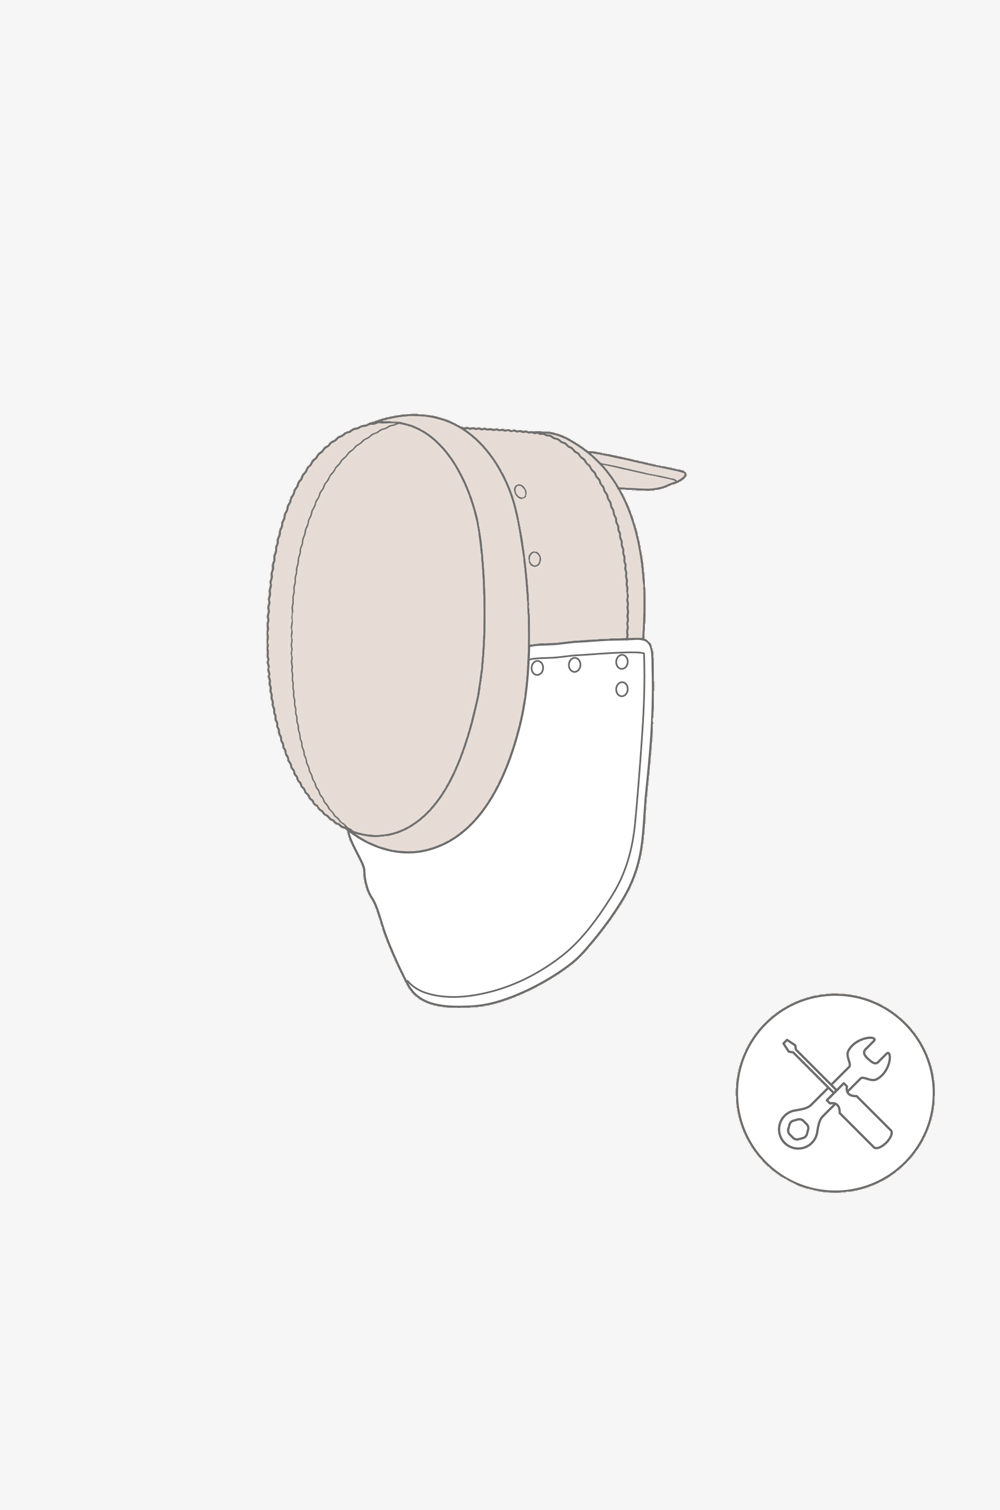 Replacement of the Bib Epee Mask 350 N